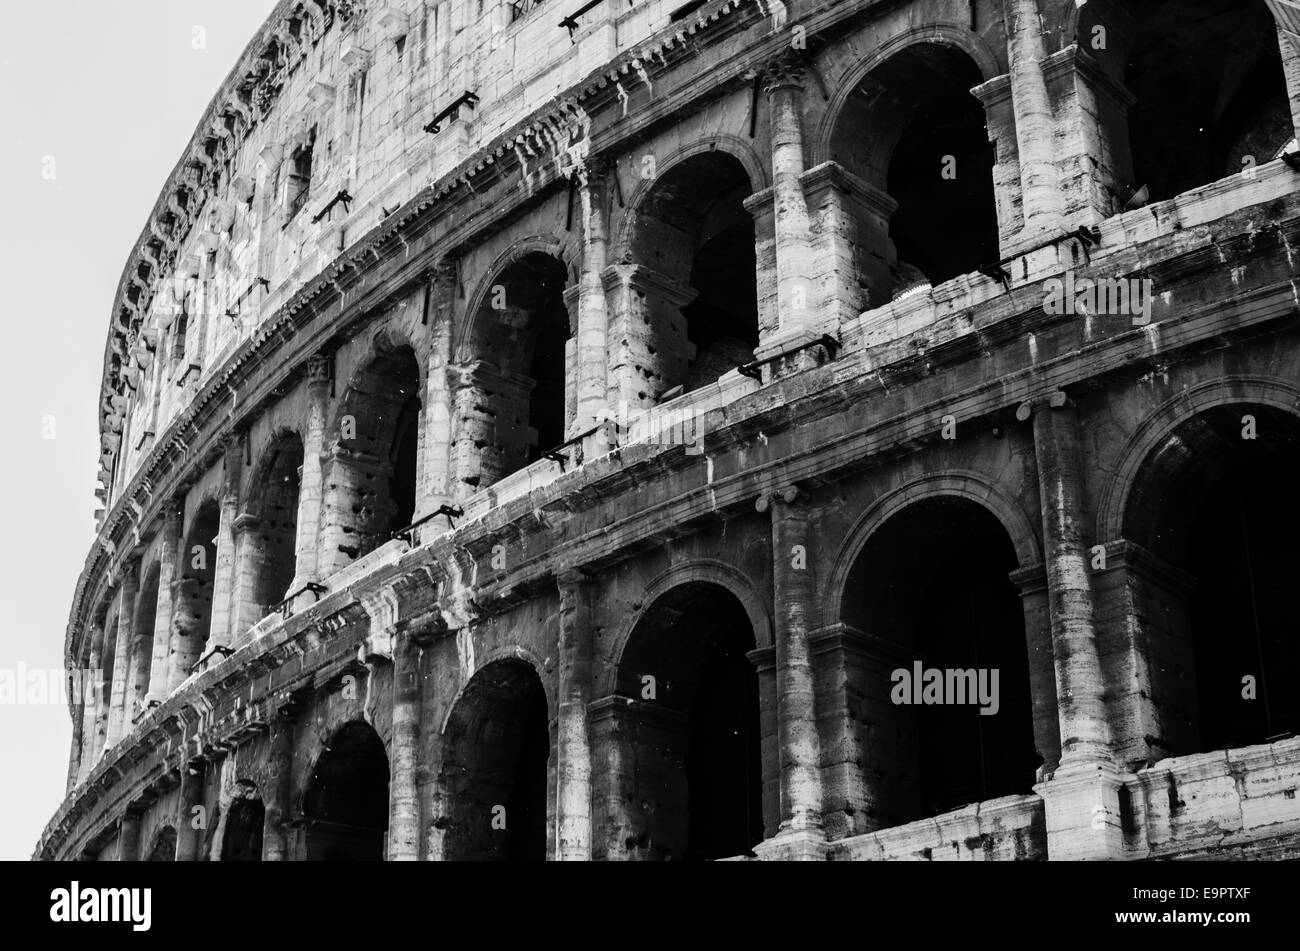 Rome - The Colosseum or Coliseum, also known as the Flavian Amphitheatre. Stock Photo